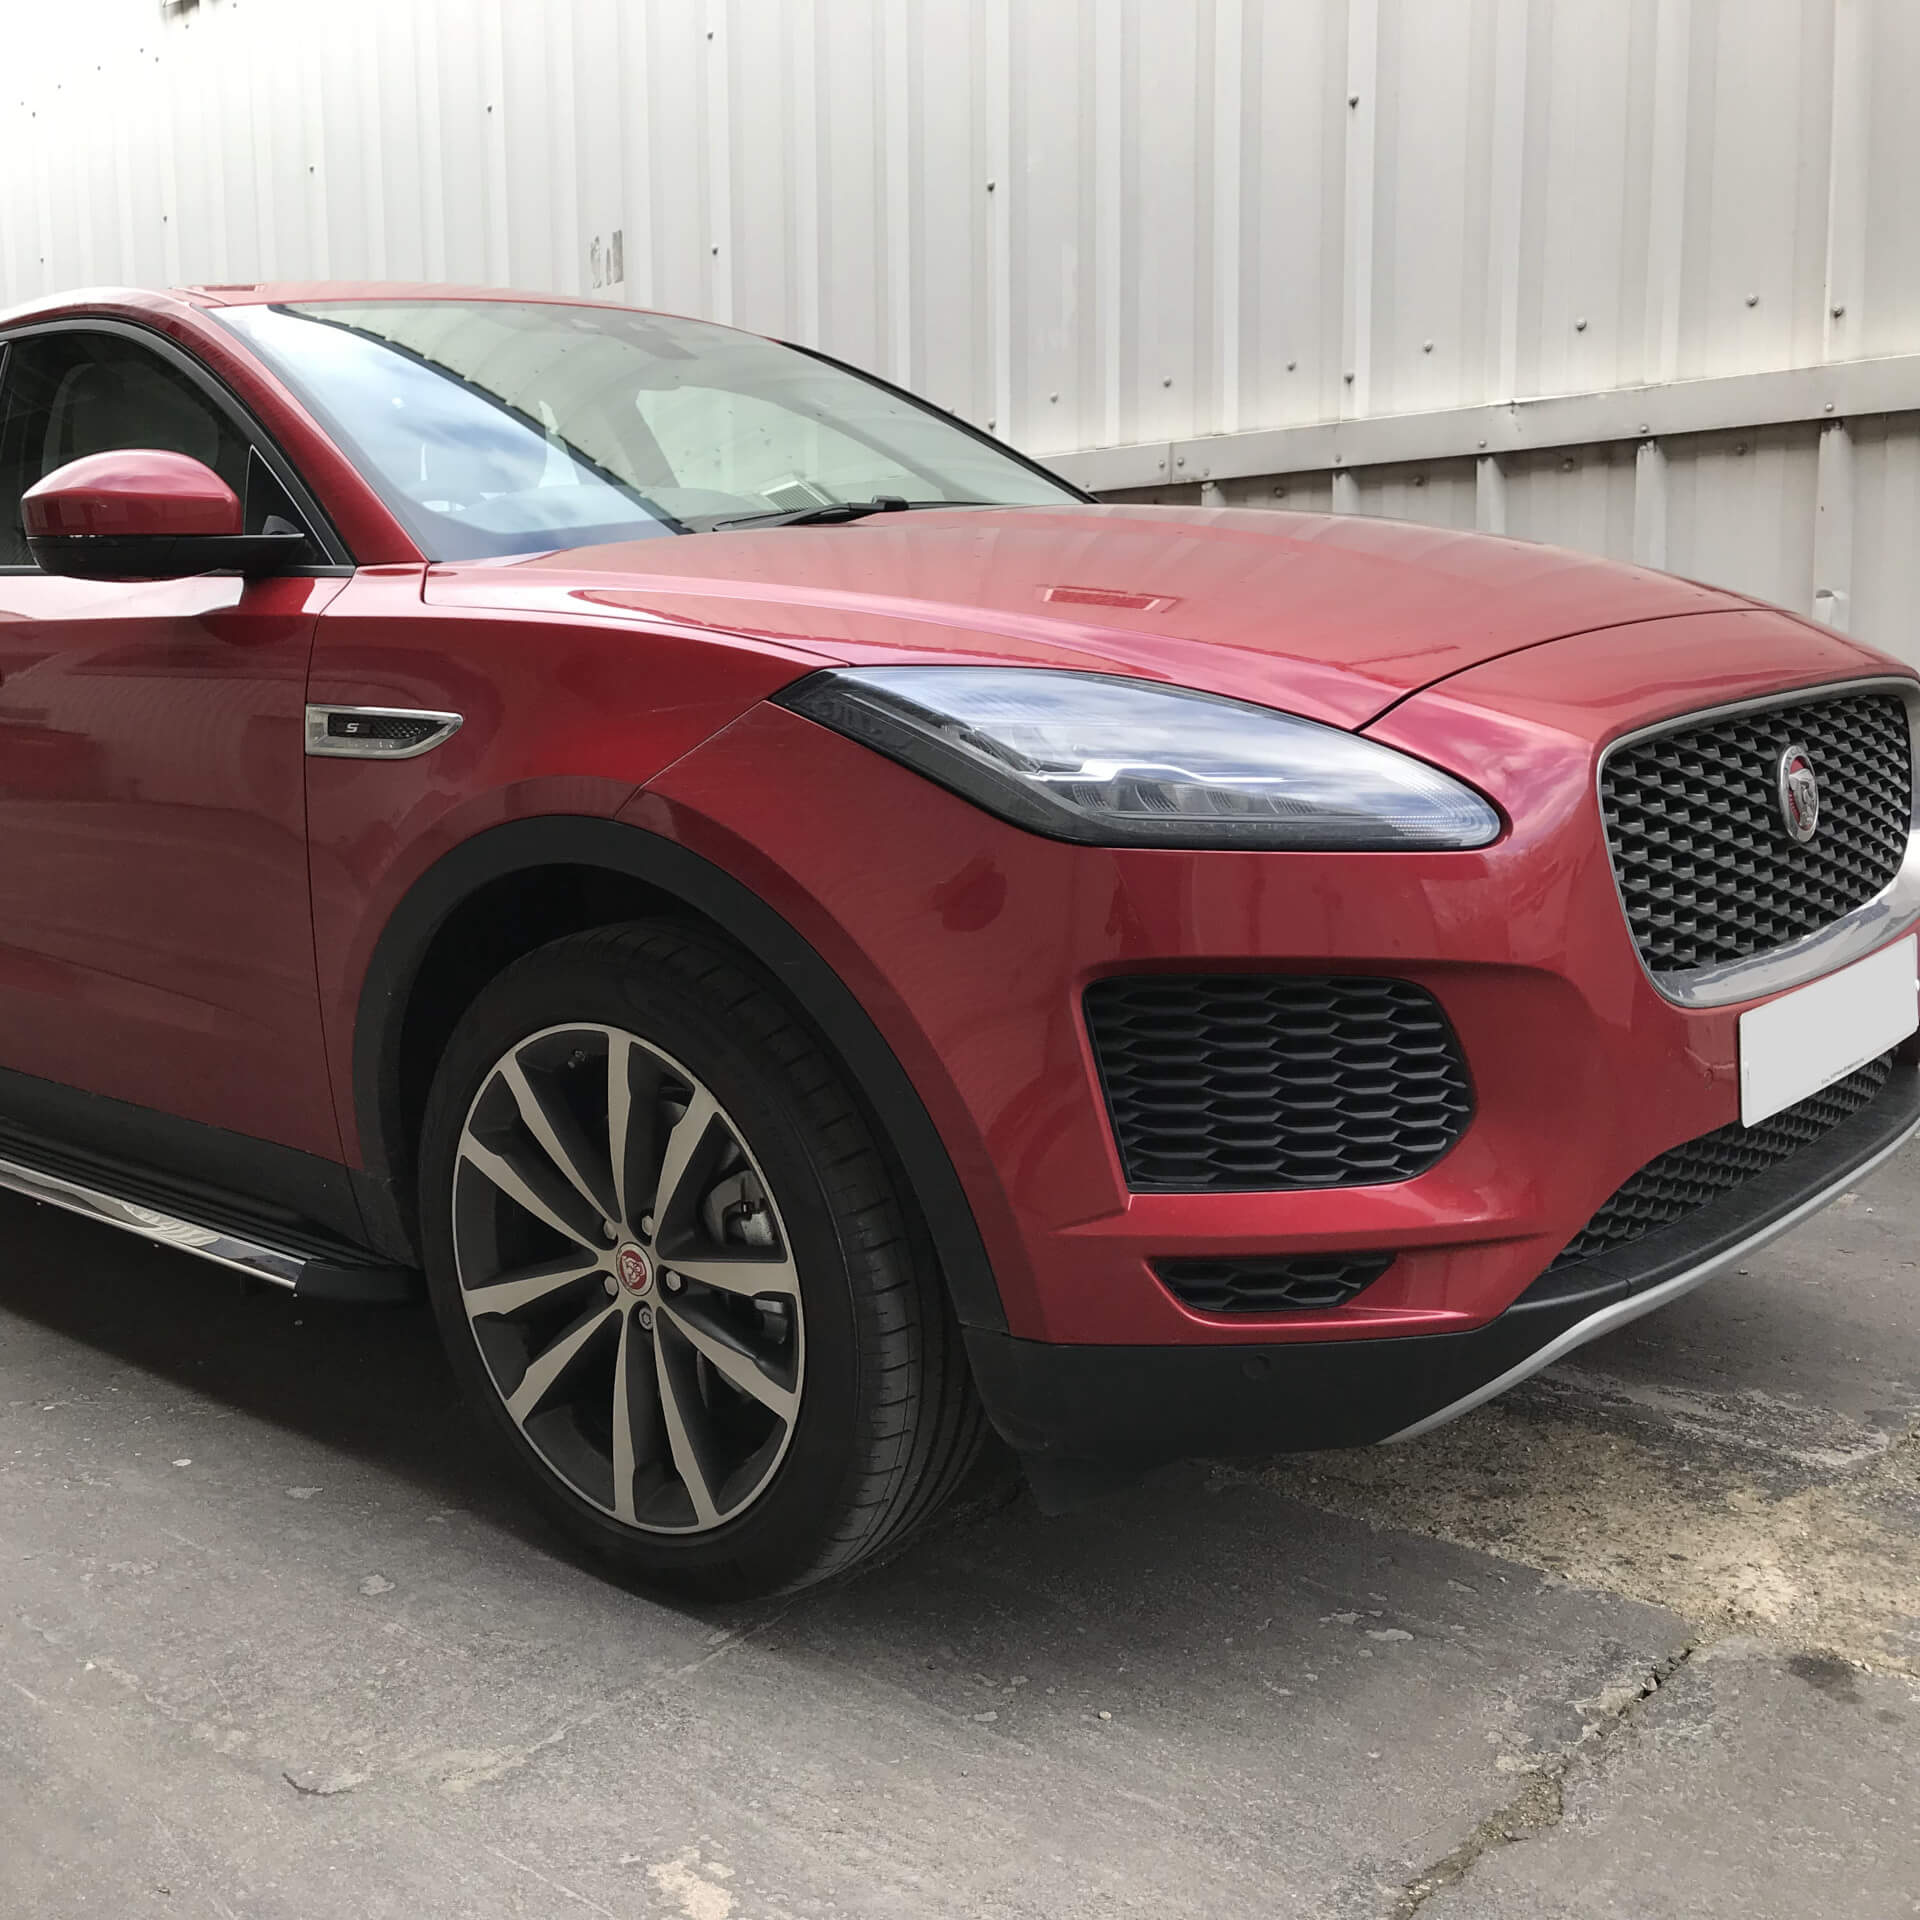 Direct4x4 accessories for Jaguar E-Pace vehicles with a photo of the front of a red Jaguar E-Pace outside our offices